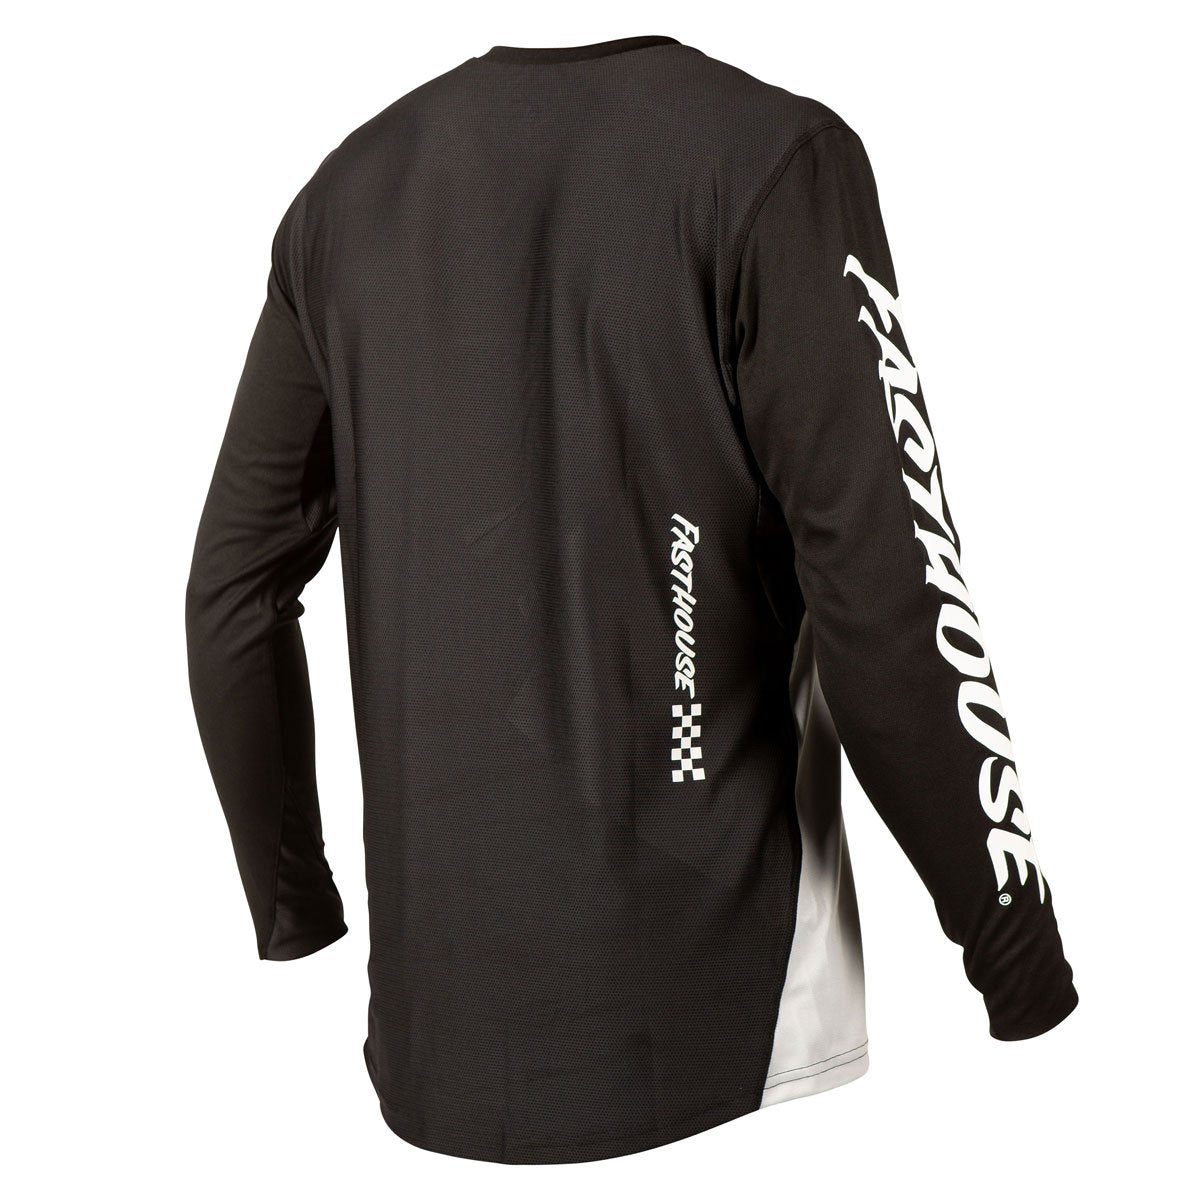 Jersey FastHouse Alloy Kilo LS